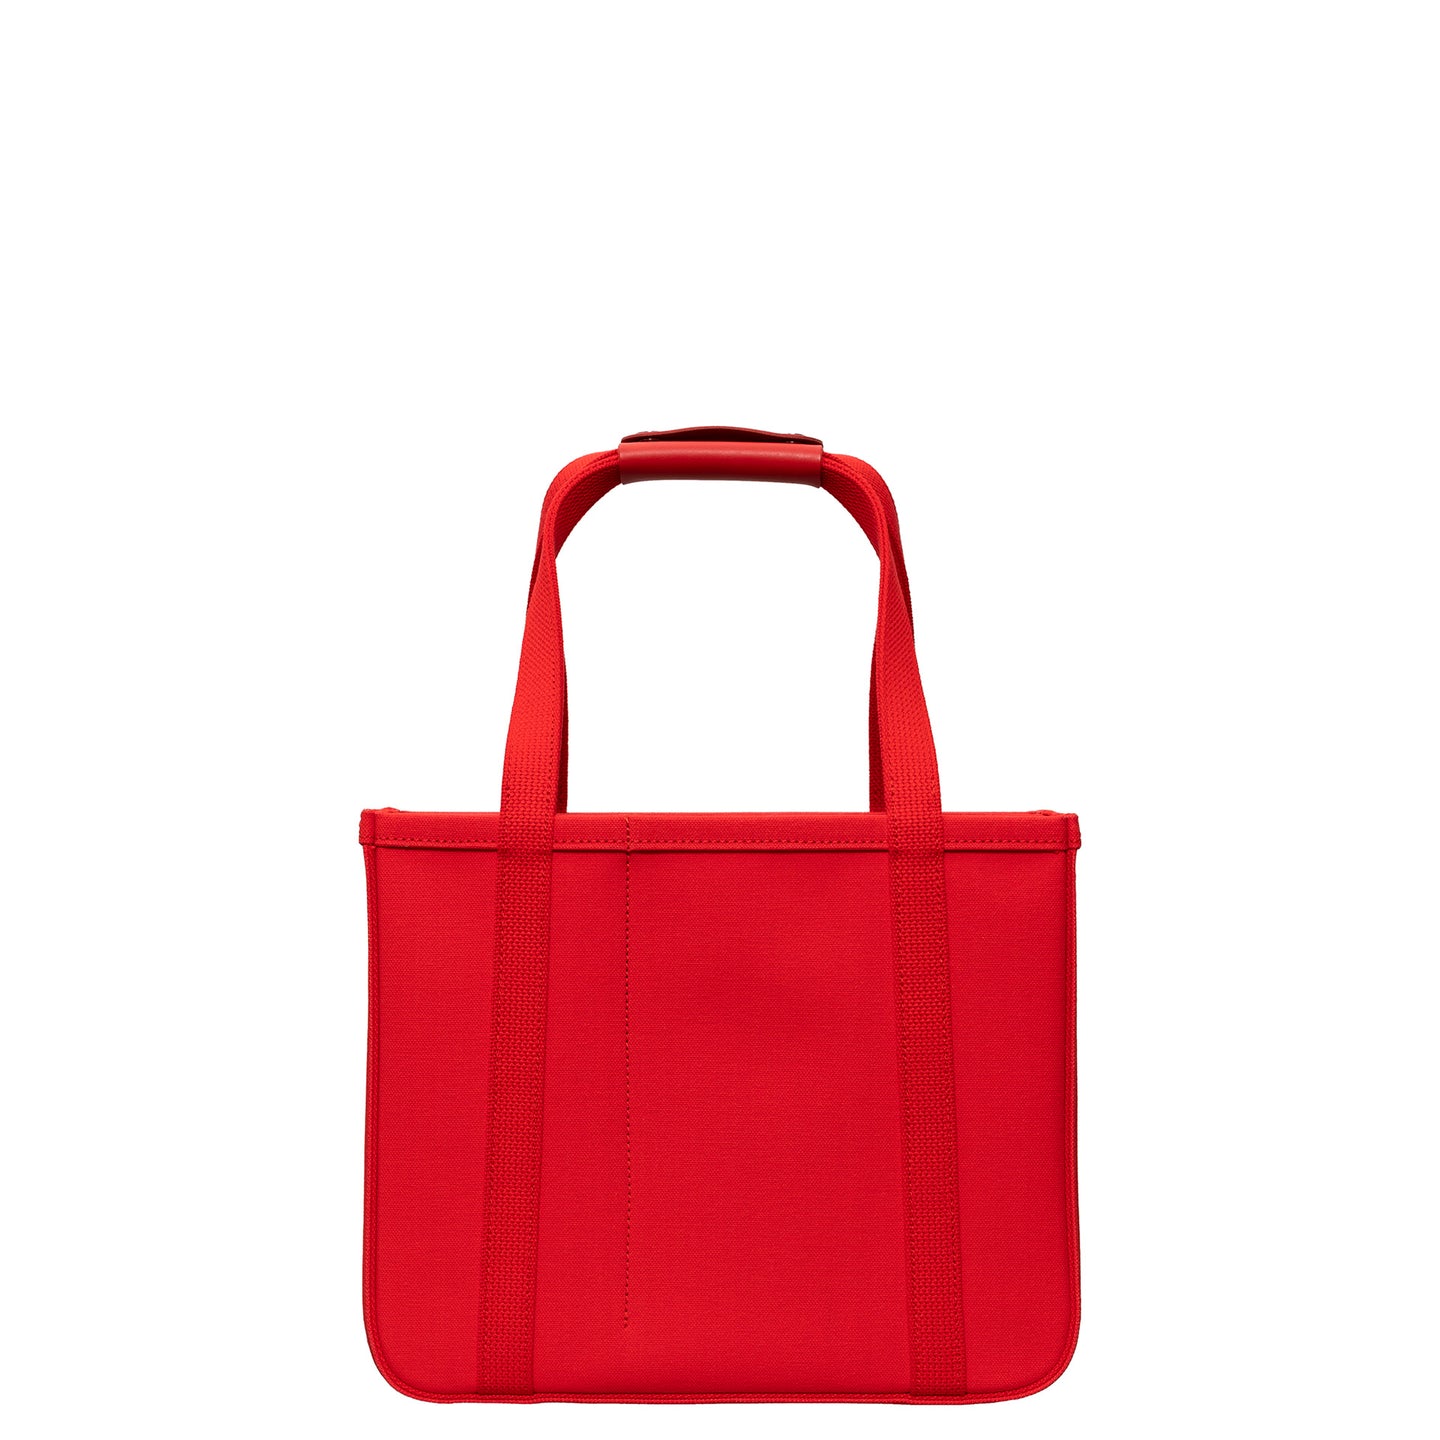 RED CANVAS TOTE